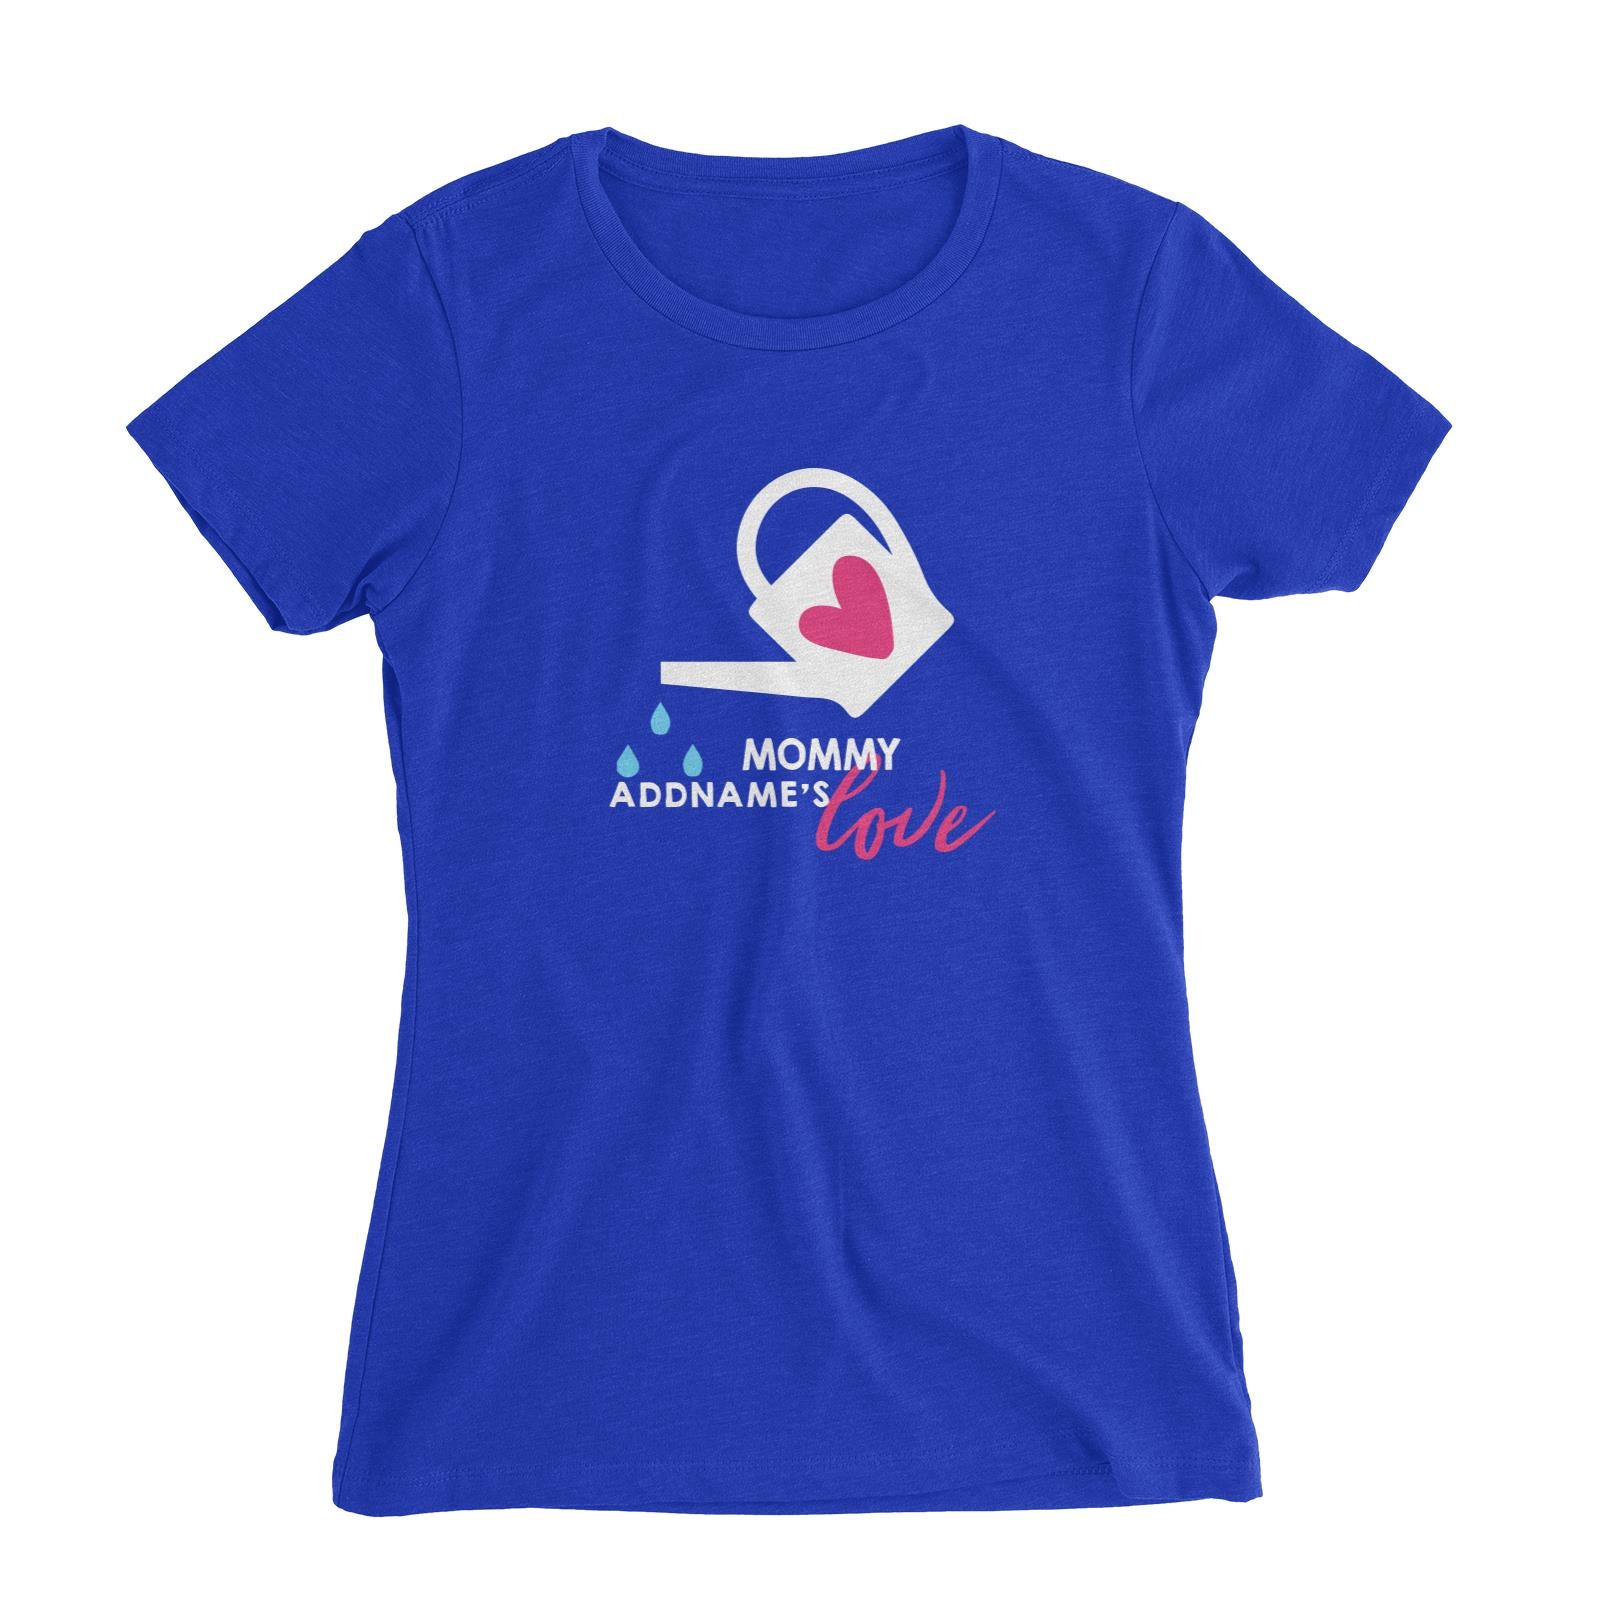 Nurturing Mommy's Love Addname Women's Slim Fit T-Shirt  Matching Family Personalizable Designs